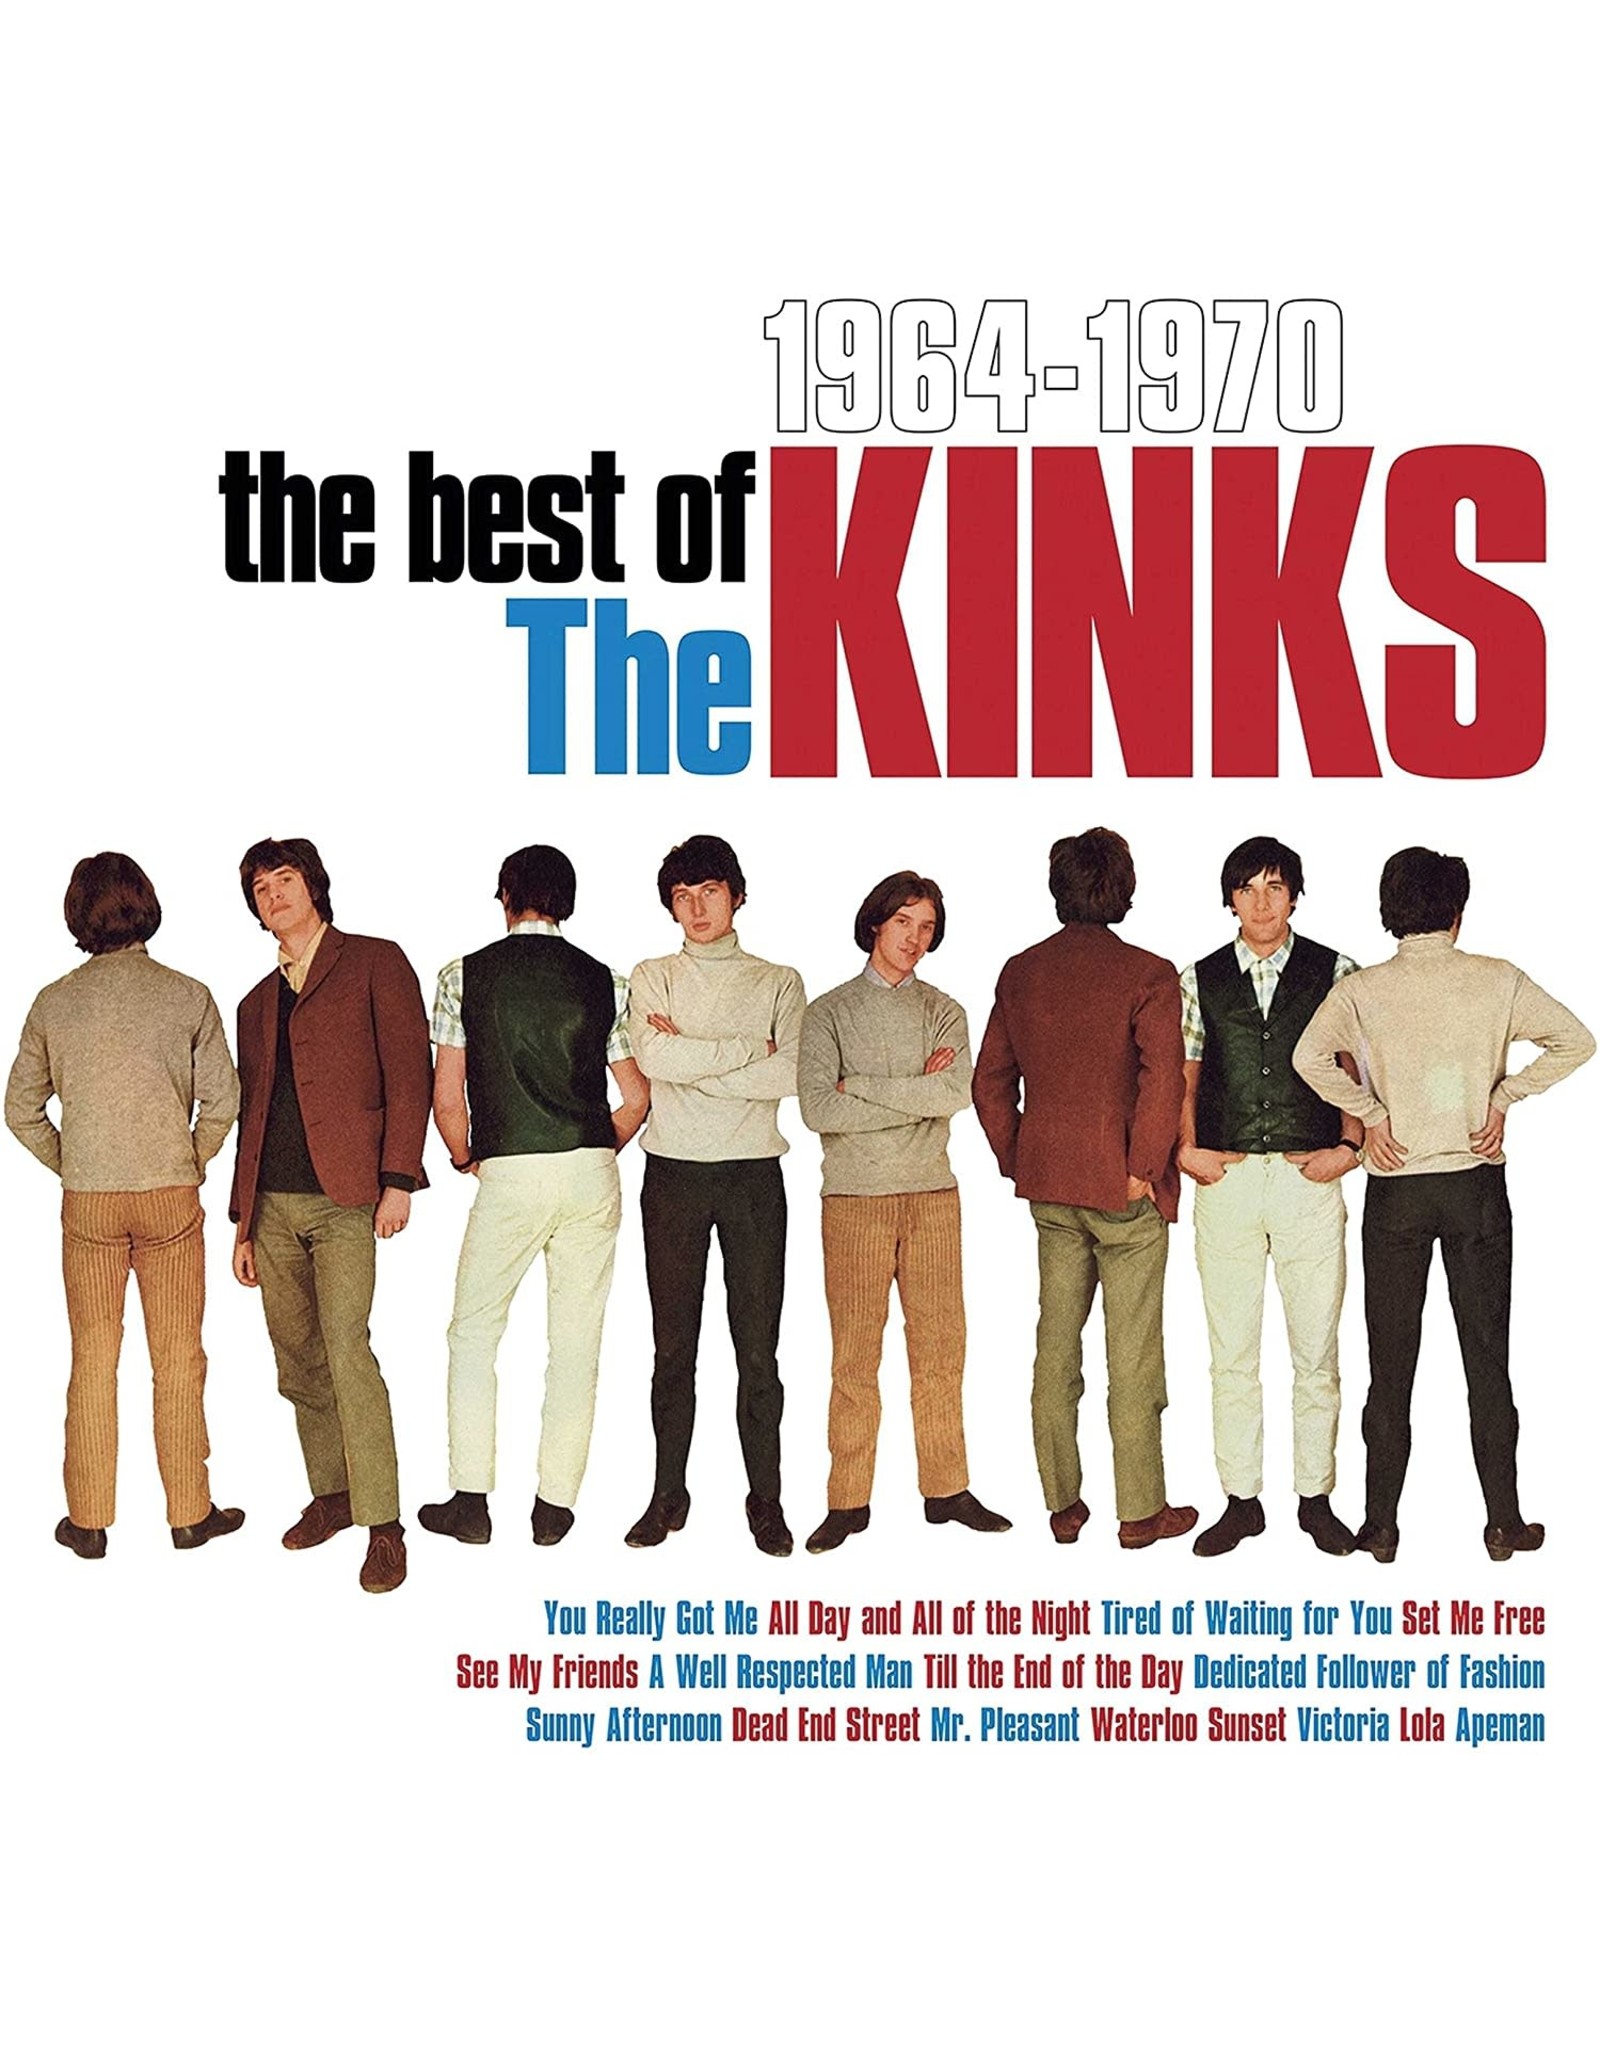 Kinks - The Best Of The Kinks: 1964-1970